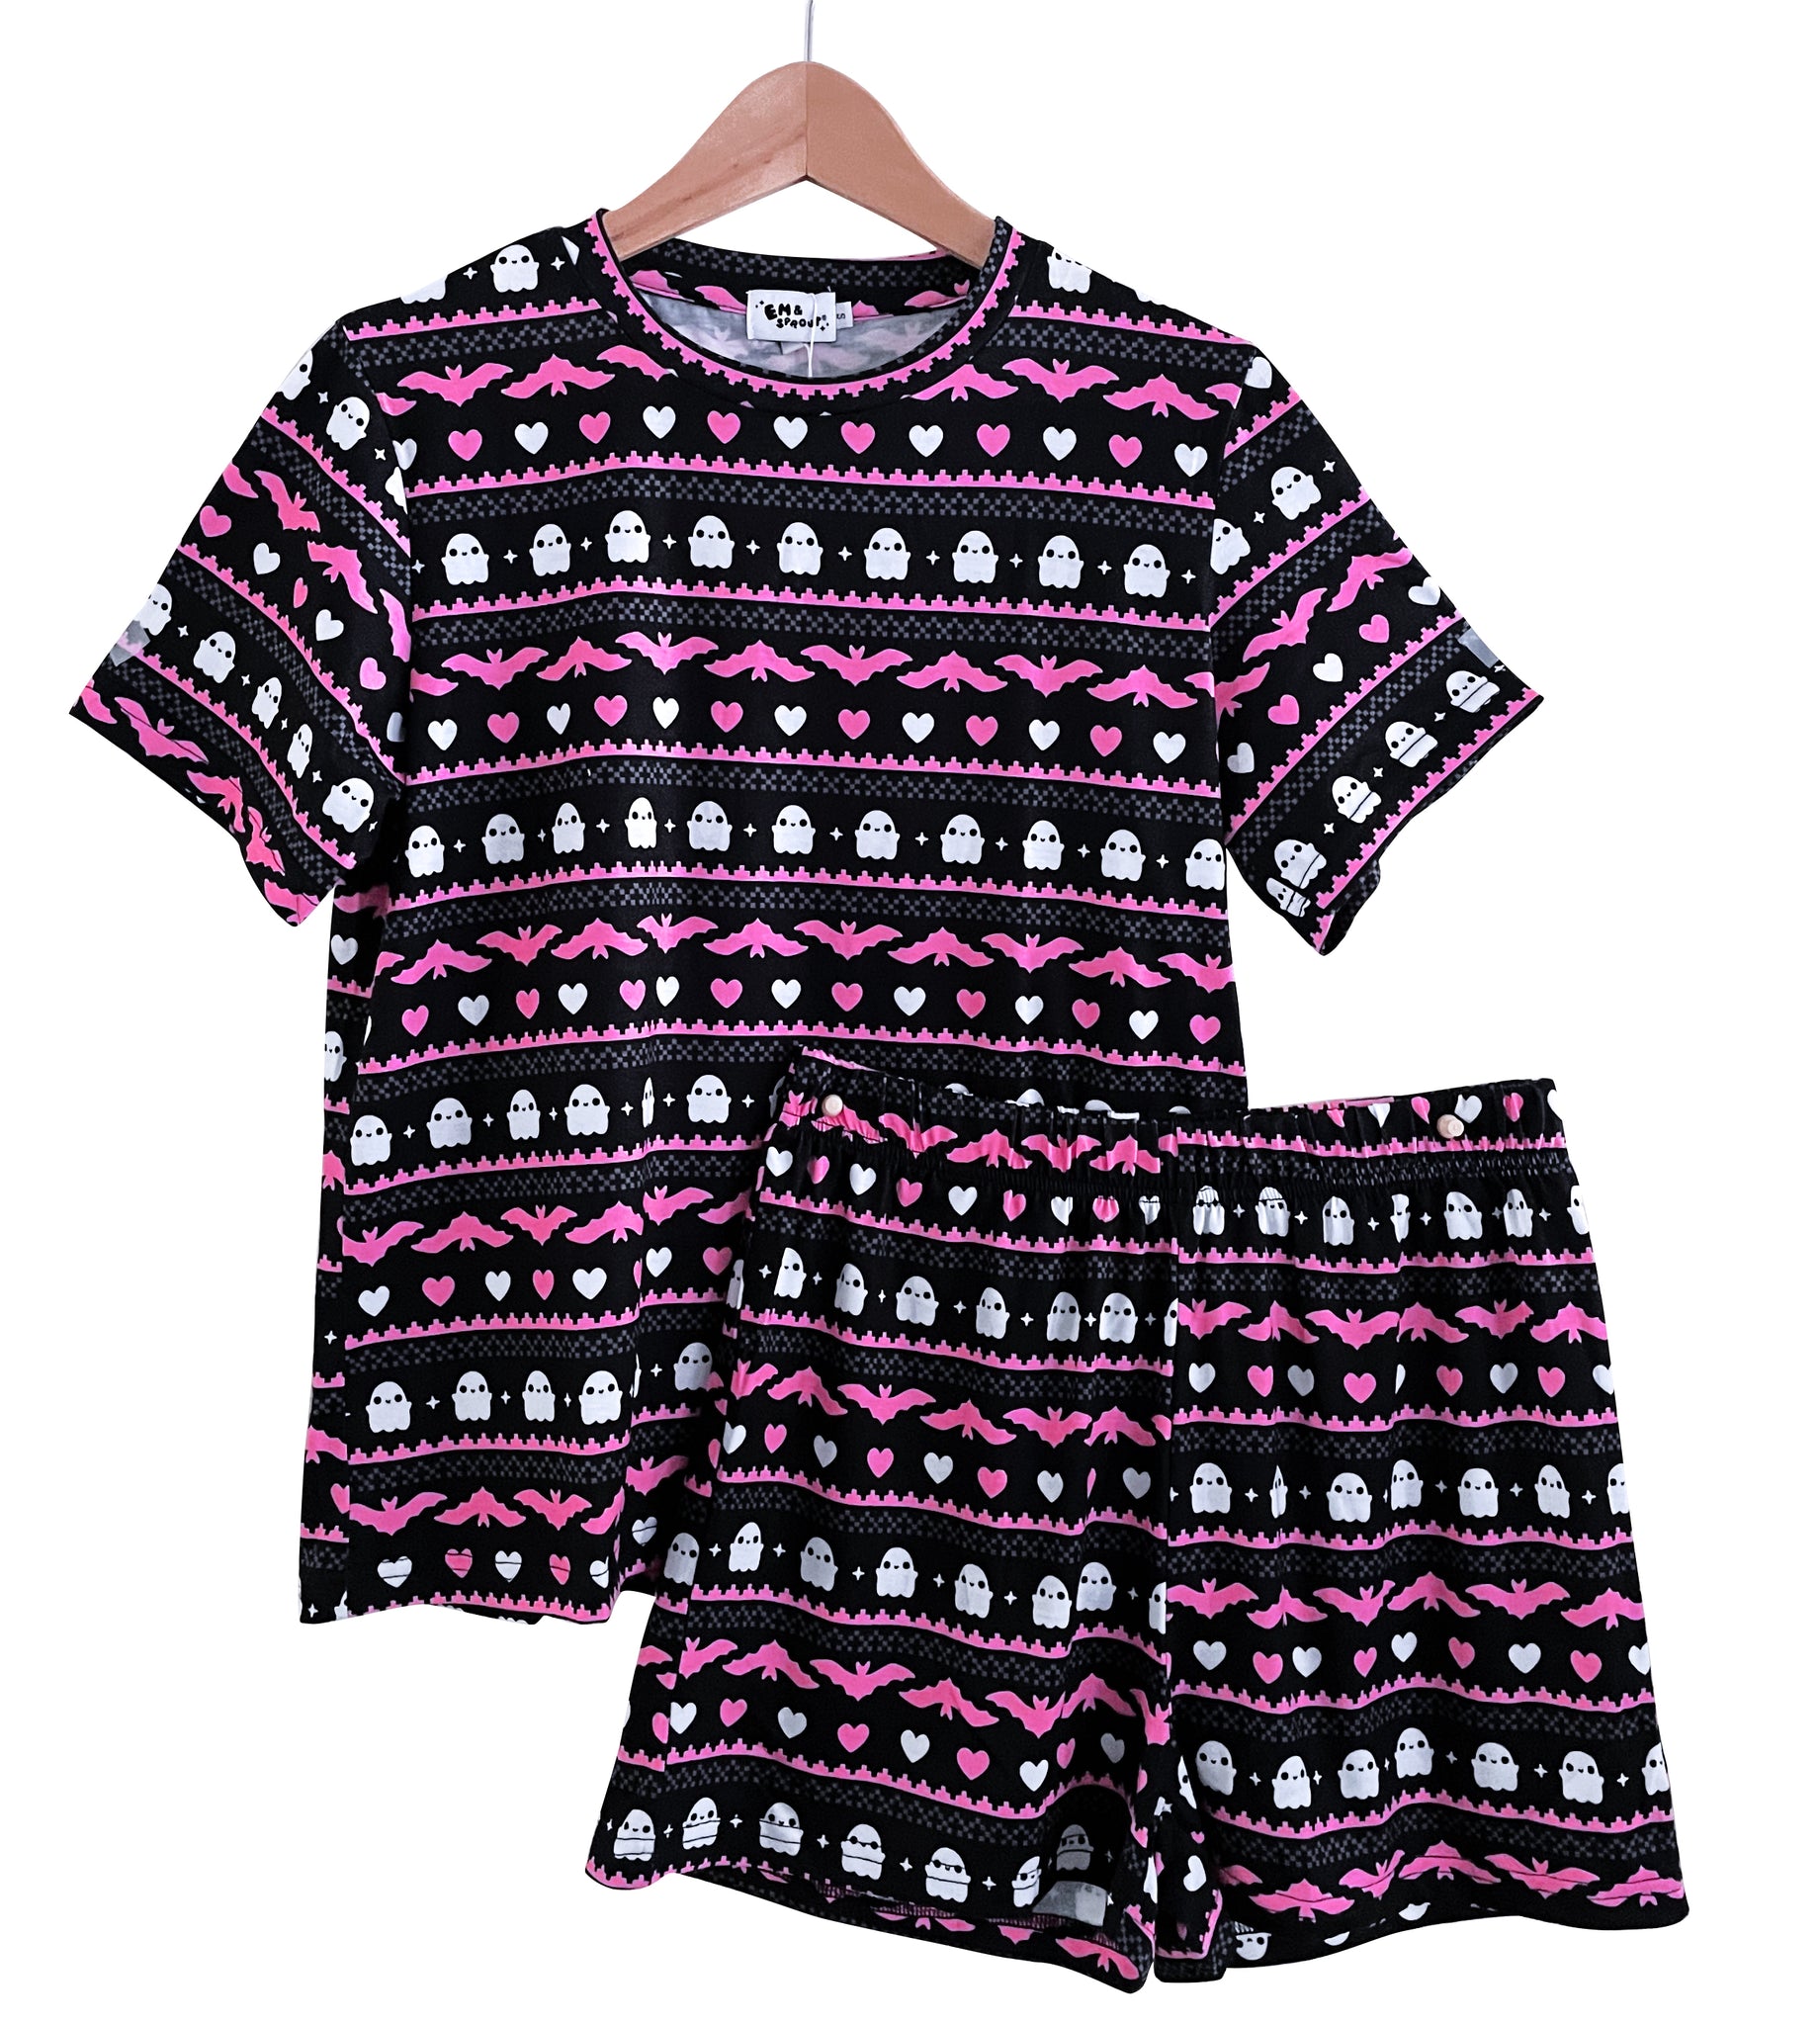 Spooky Valentine Pajamas Shorts and Top Set